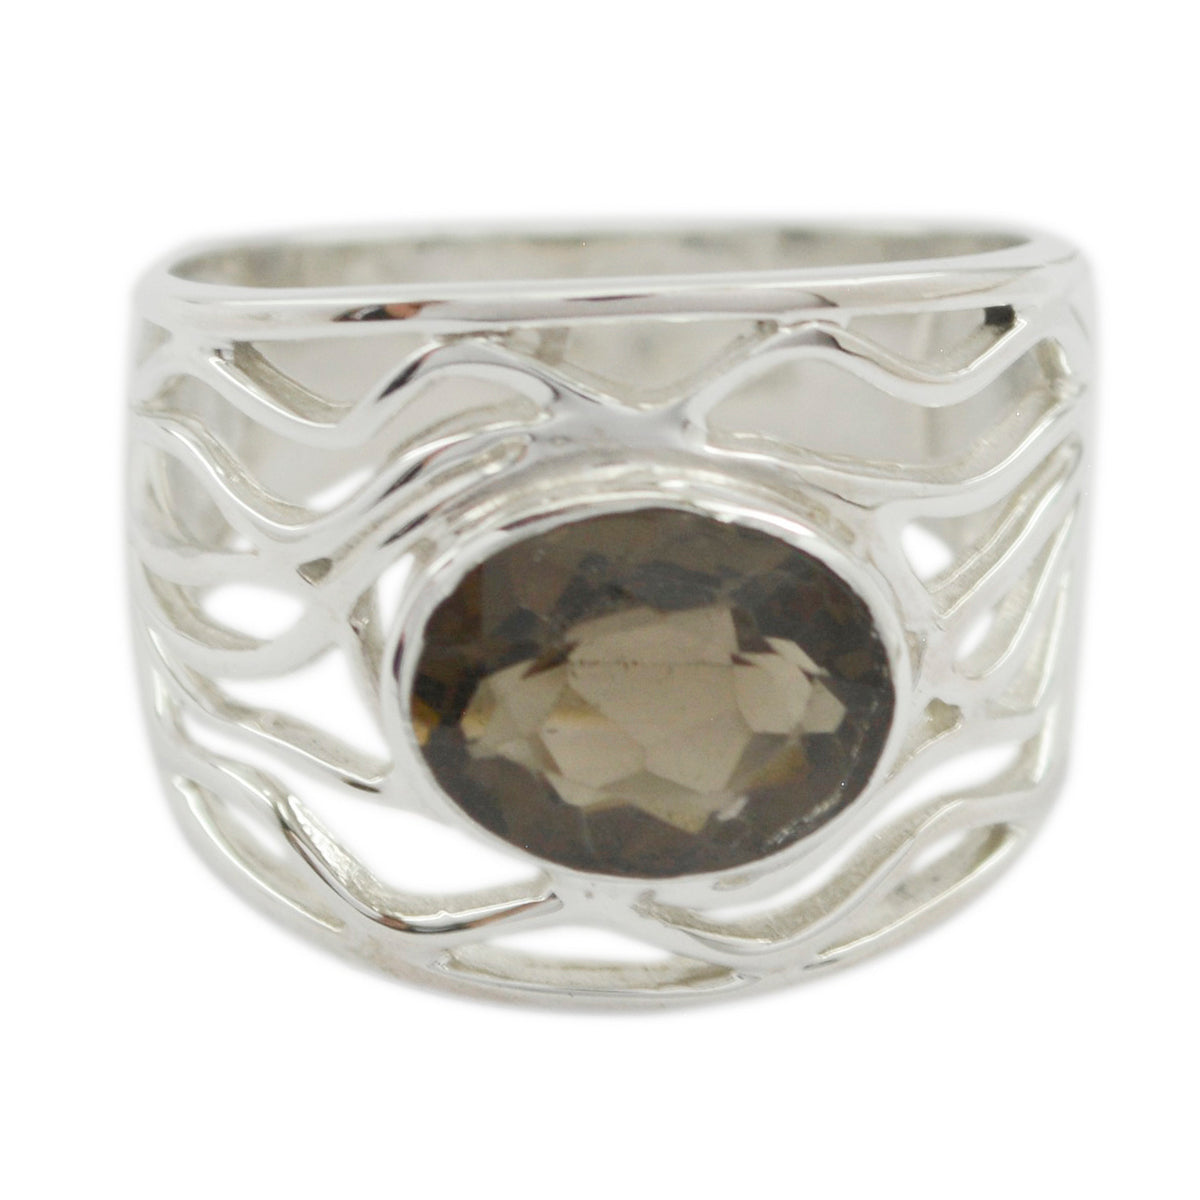 Aesthetic Stone Smoky Quartz 925 Sterling Silver Ring Jewelry Loupe